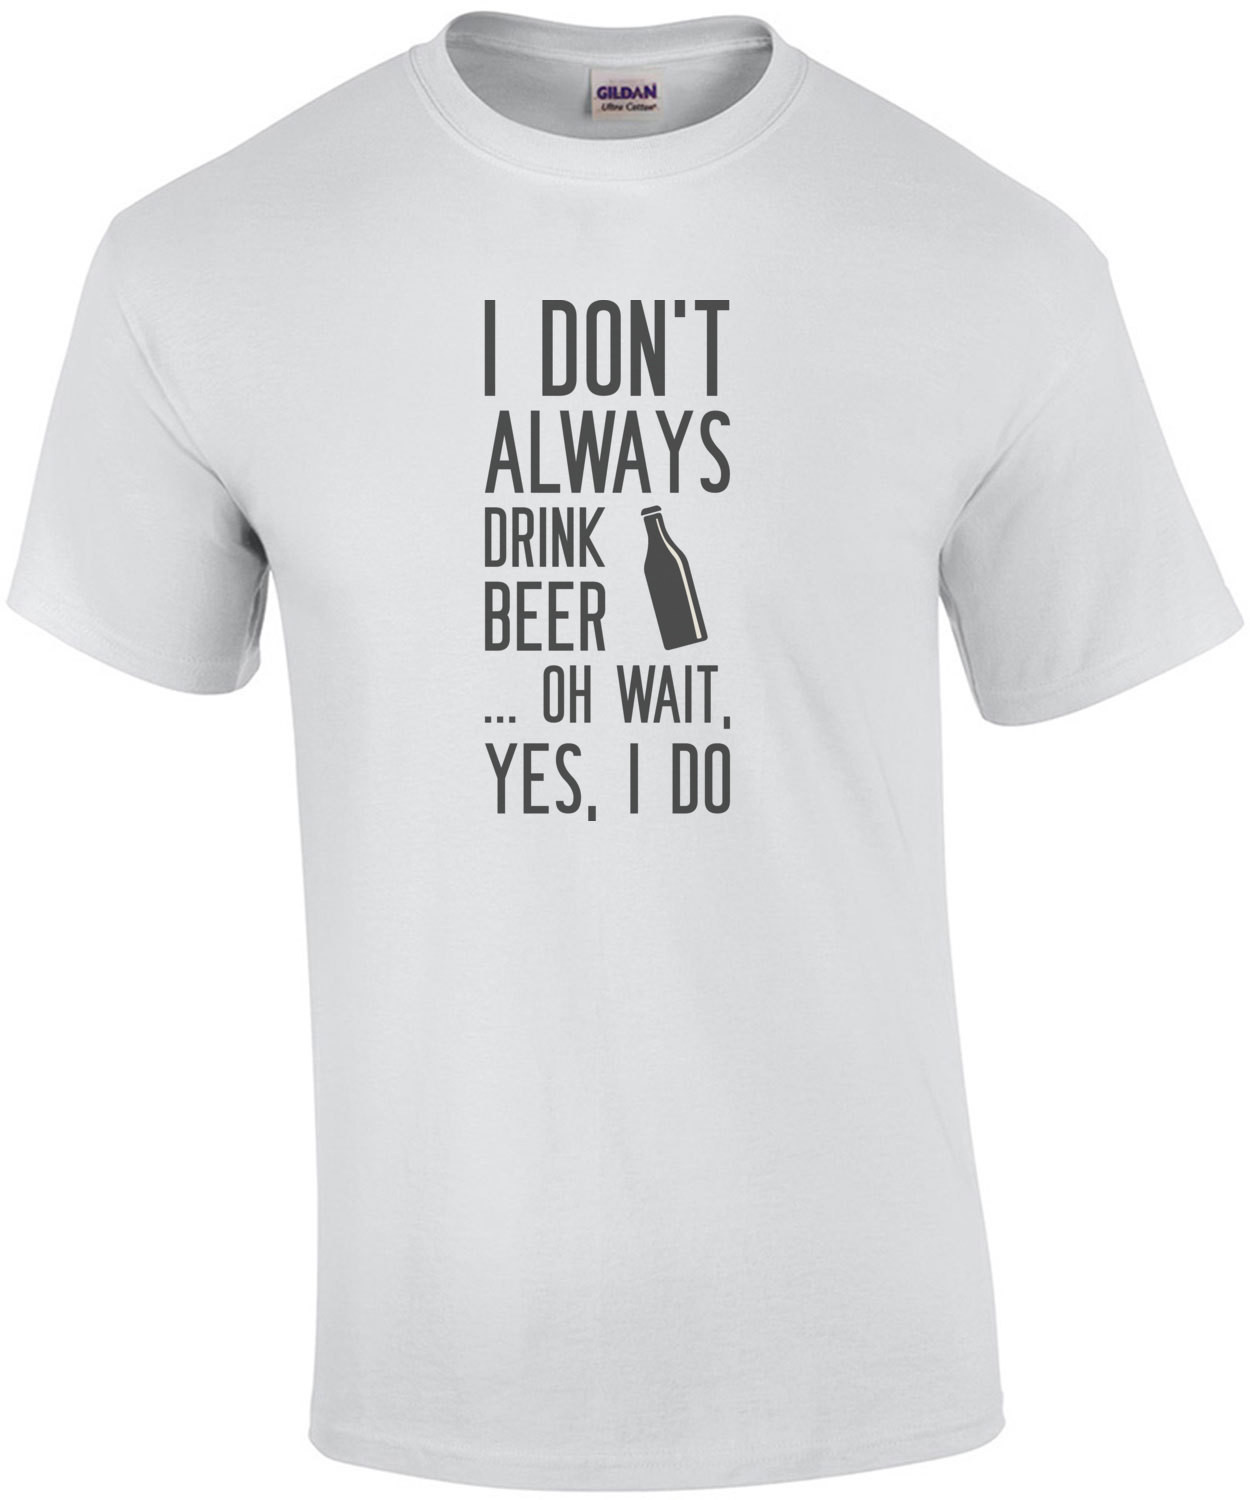 I don't always drink beer... oh wait, yes, I do. Beer T-Shirt